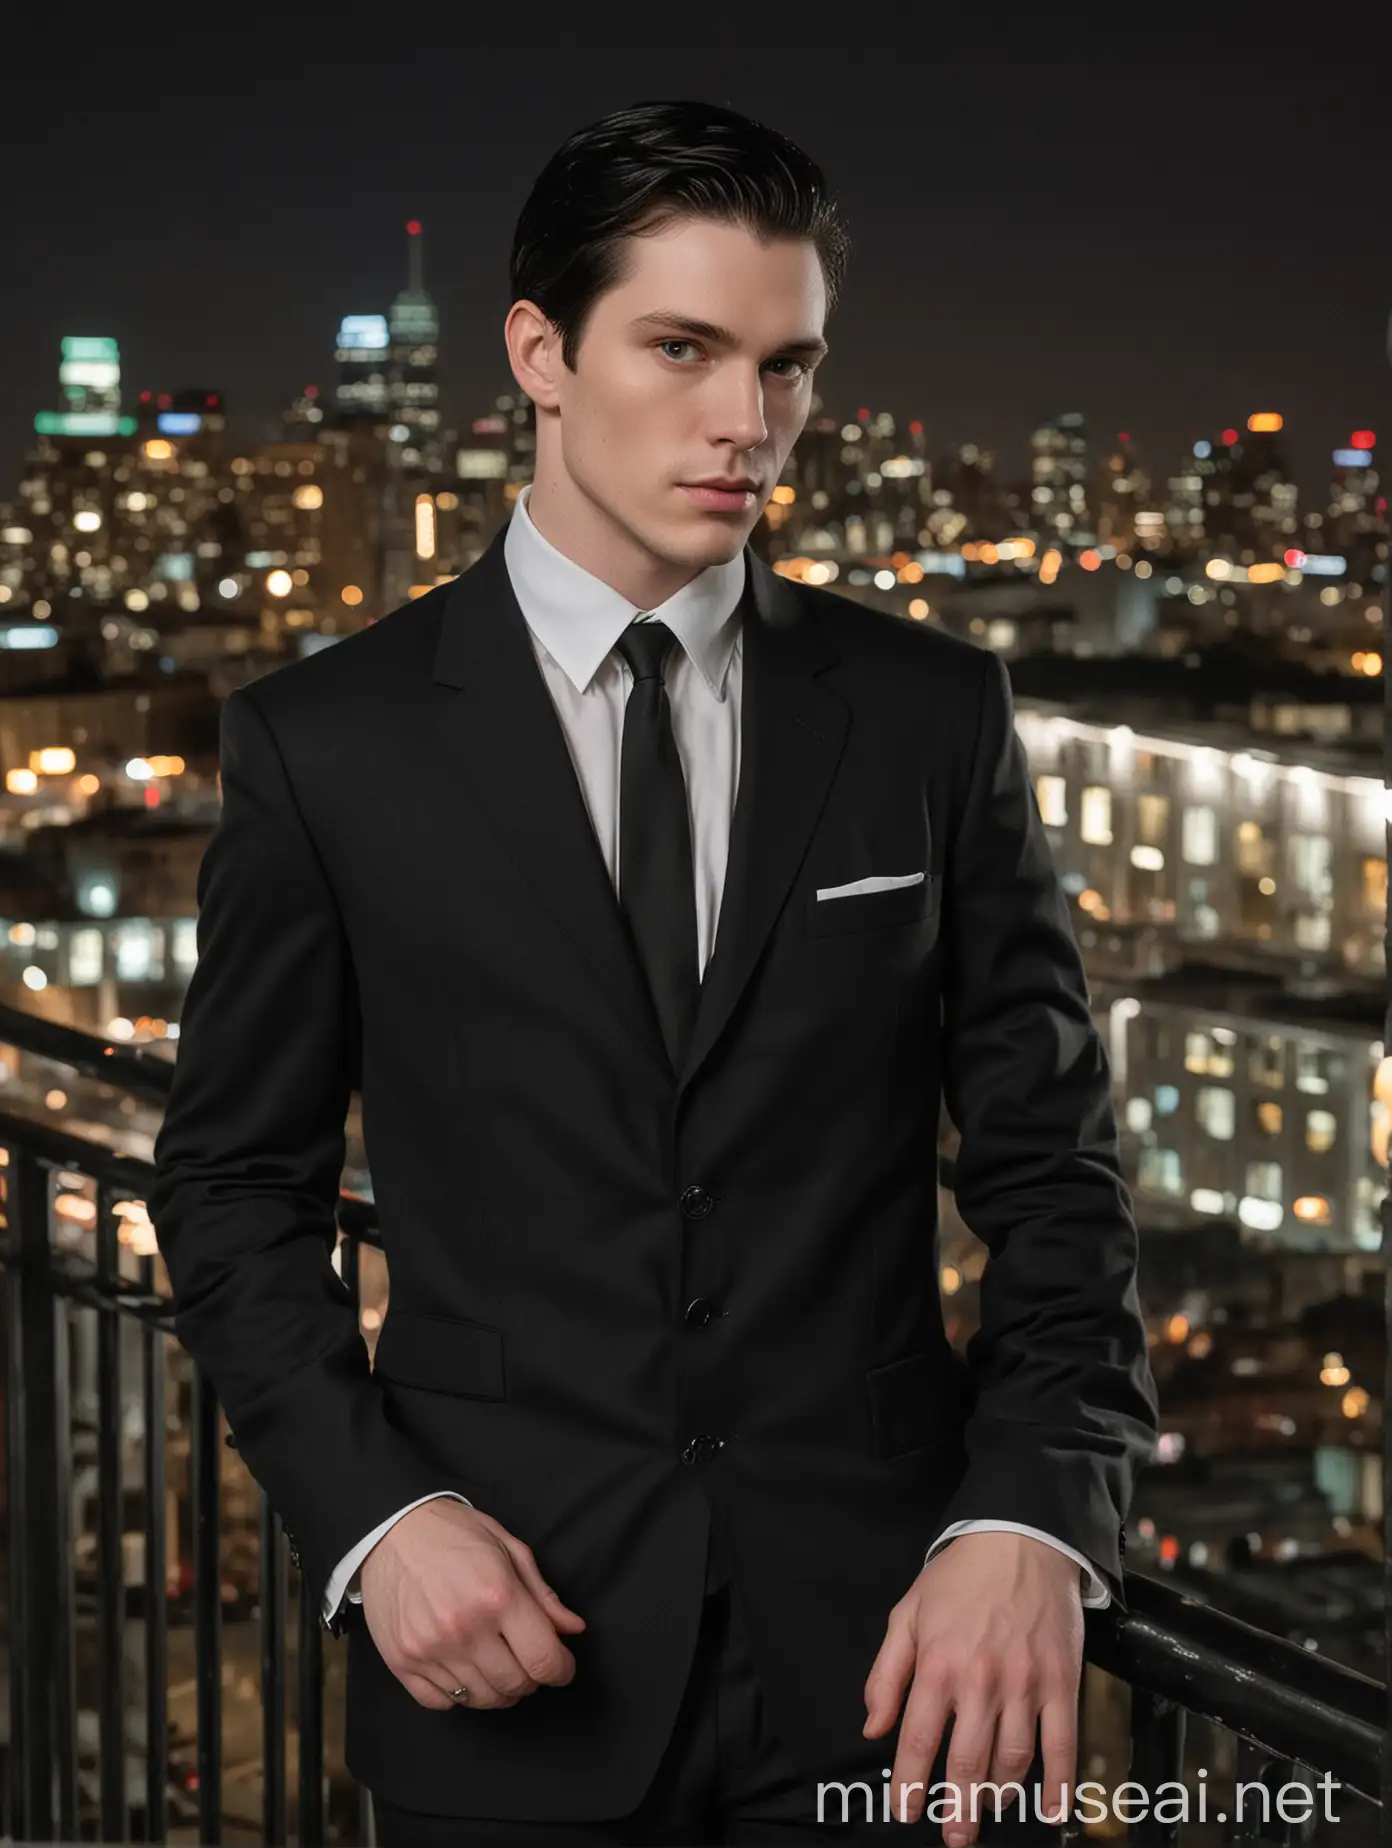 The subject of the portrait is a man with white, pale skin and a flawless physique and athletic body while looking at the camera intently. He’s wearing business attire and have mid length regulation-cut black hair. He is leaning at the railings of building. The background should be night time and buildings with lots of city lights.